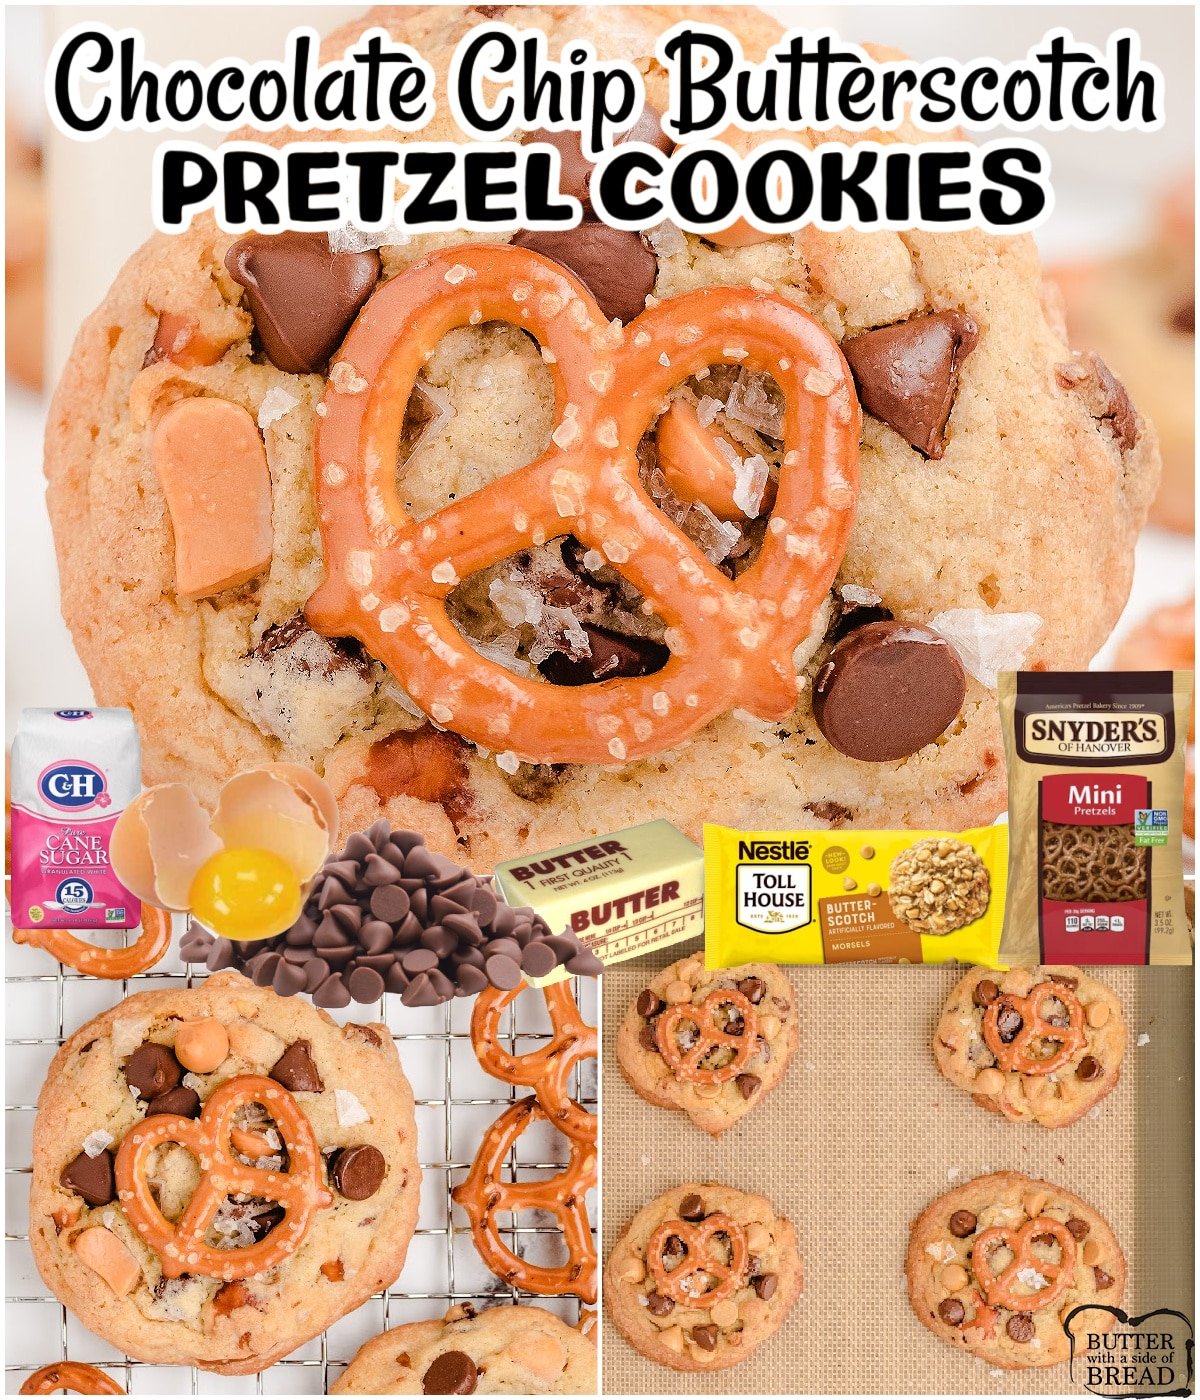 Chocolate Chip Butterscotch Pretzel Cookies are sweet & salty cookies made with pretzels, butterscotch chips, and chocolate chips!